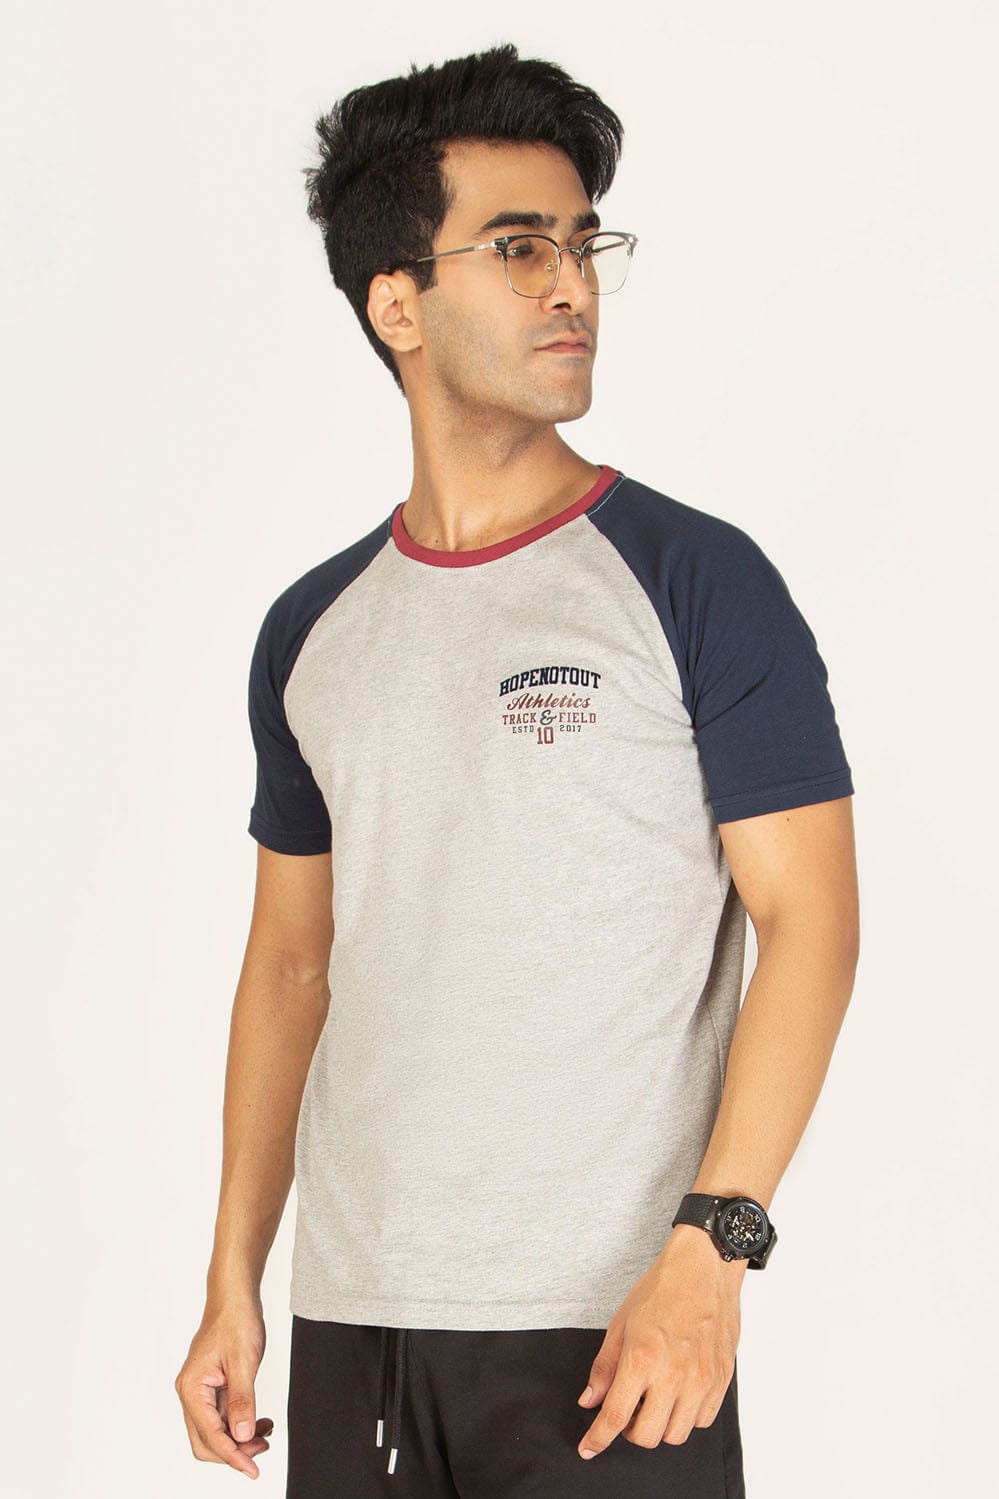 T-Shirt - Grey Melange Tee - HOPE NOT OUT by Shahid Afridi